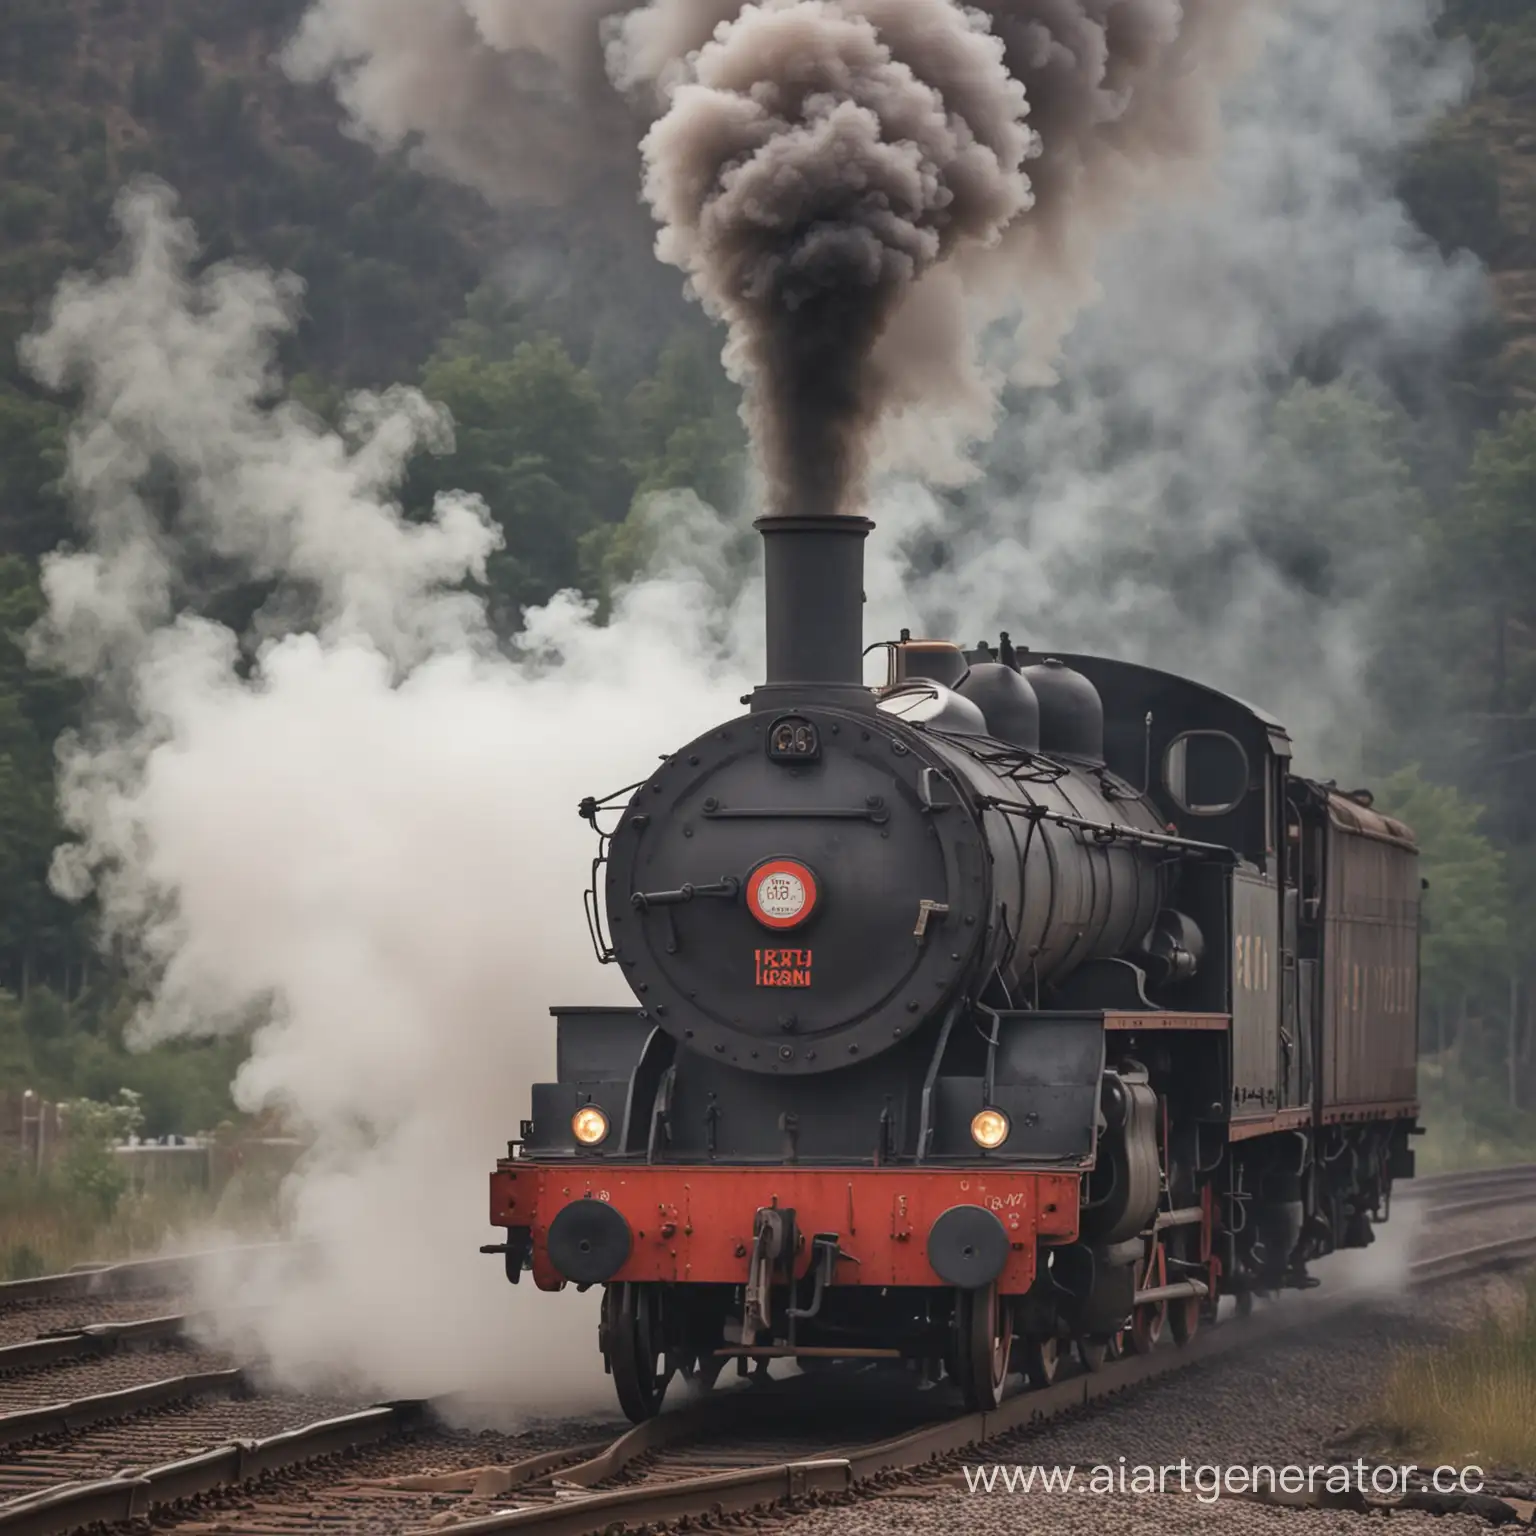 Release-Stress-Let-Off-Some-Steam-with-a-Rustic-Train-Ride